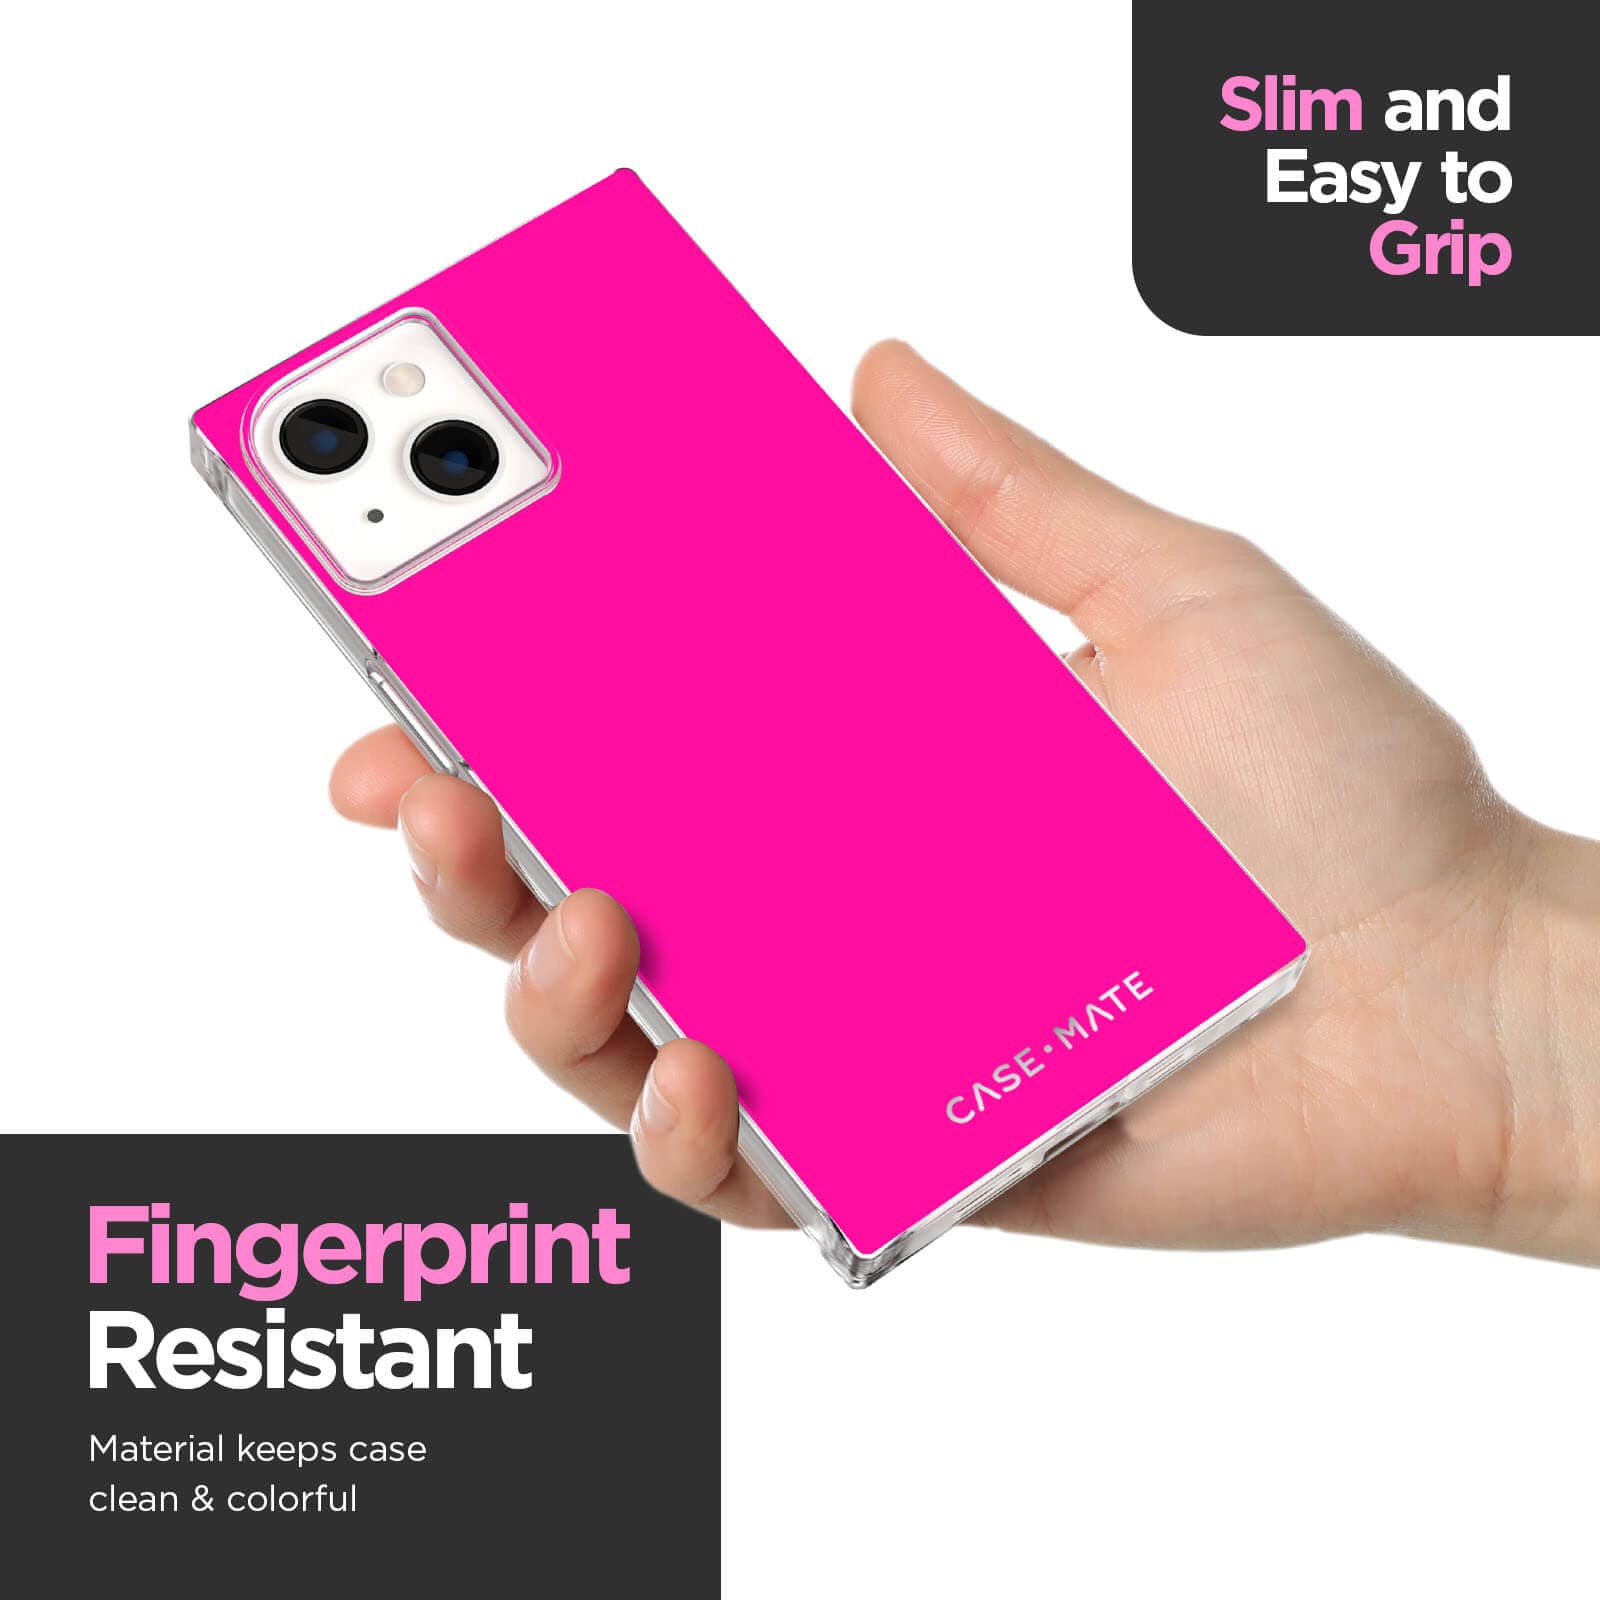 Slim and easy to grip. Fingerprint resistant material keeps case clean and colorful. color::Hot Pink